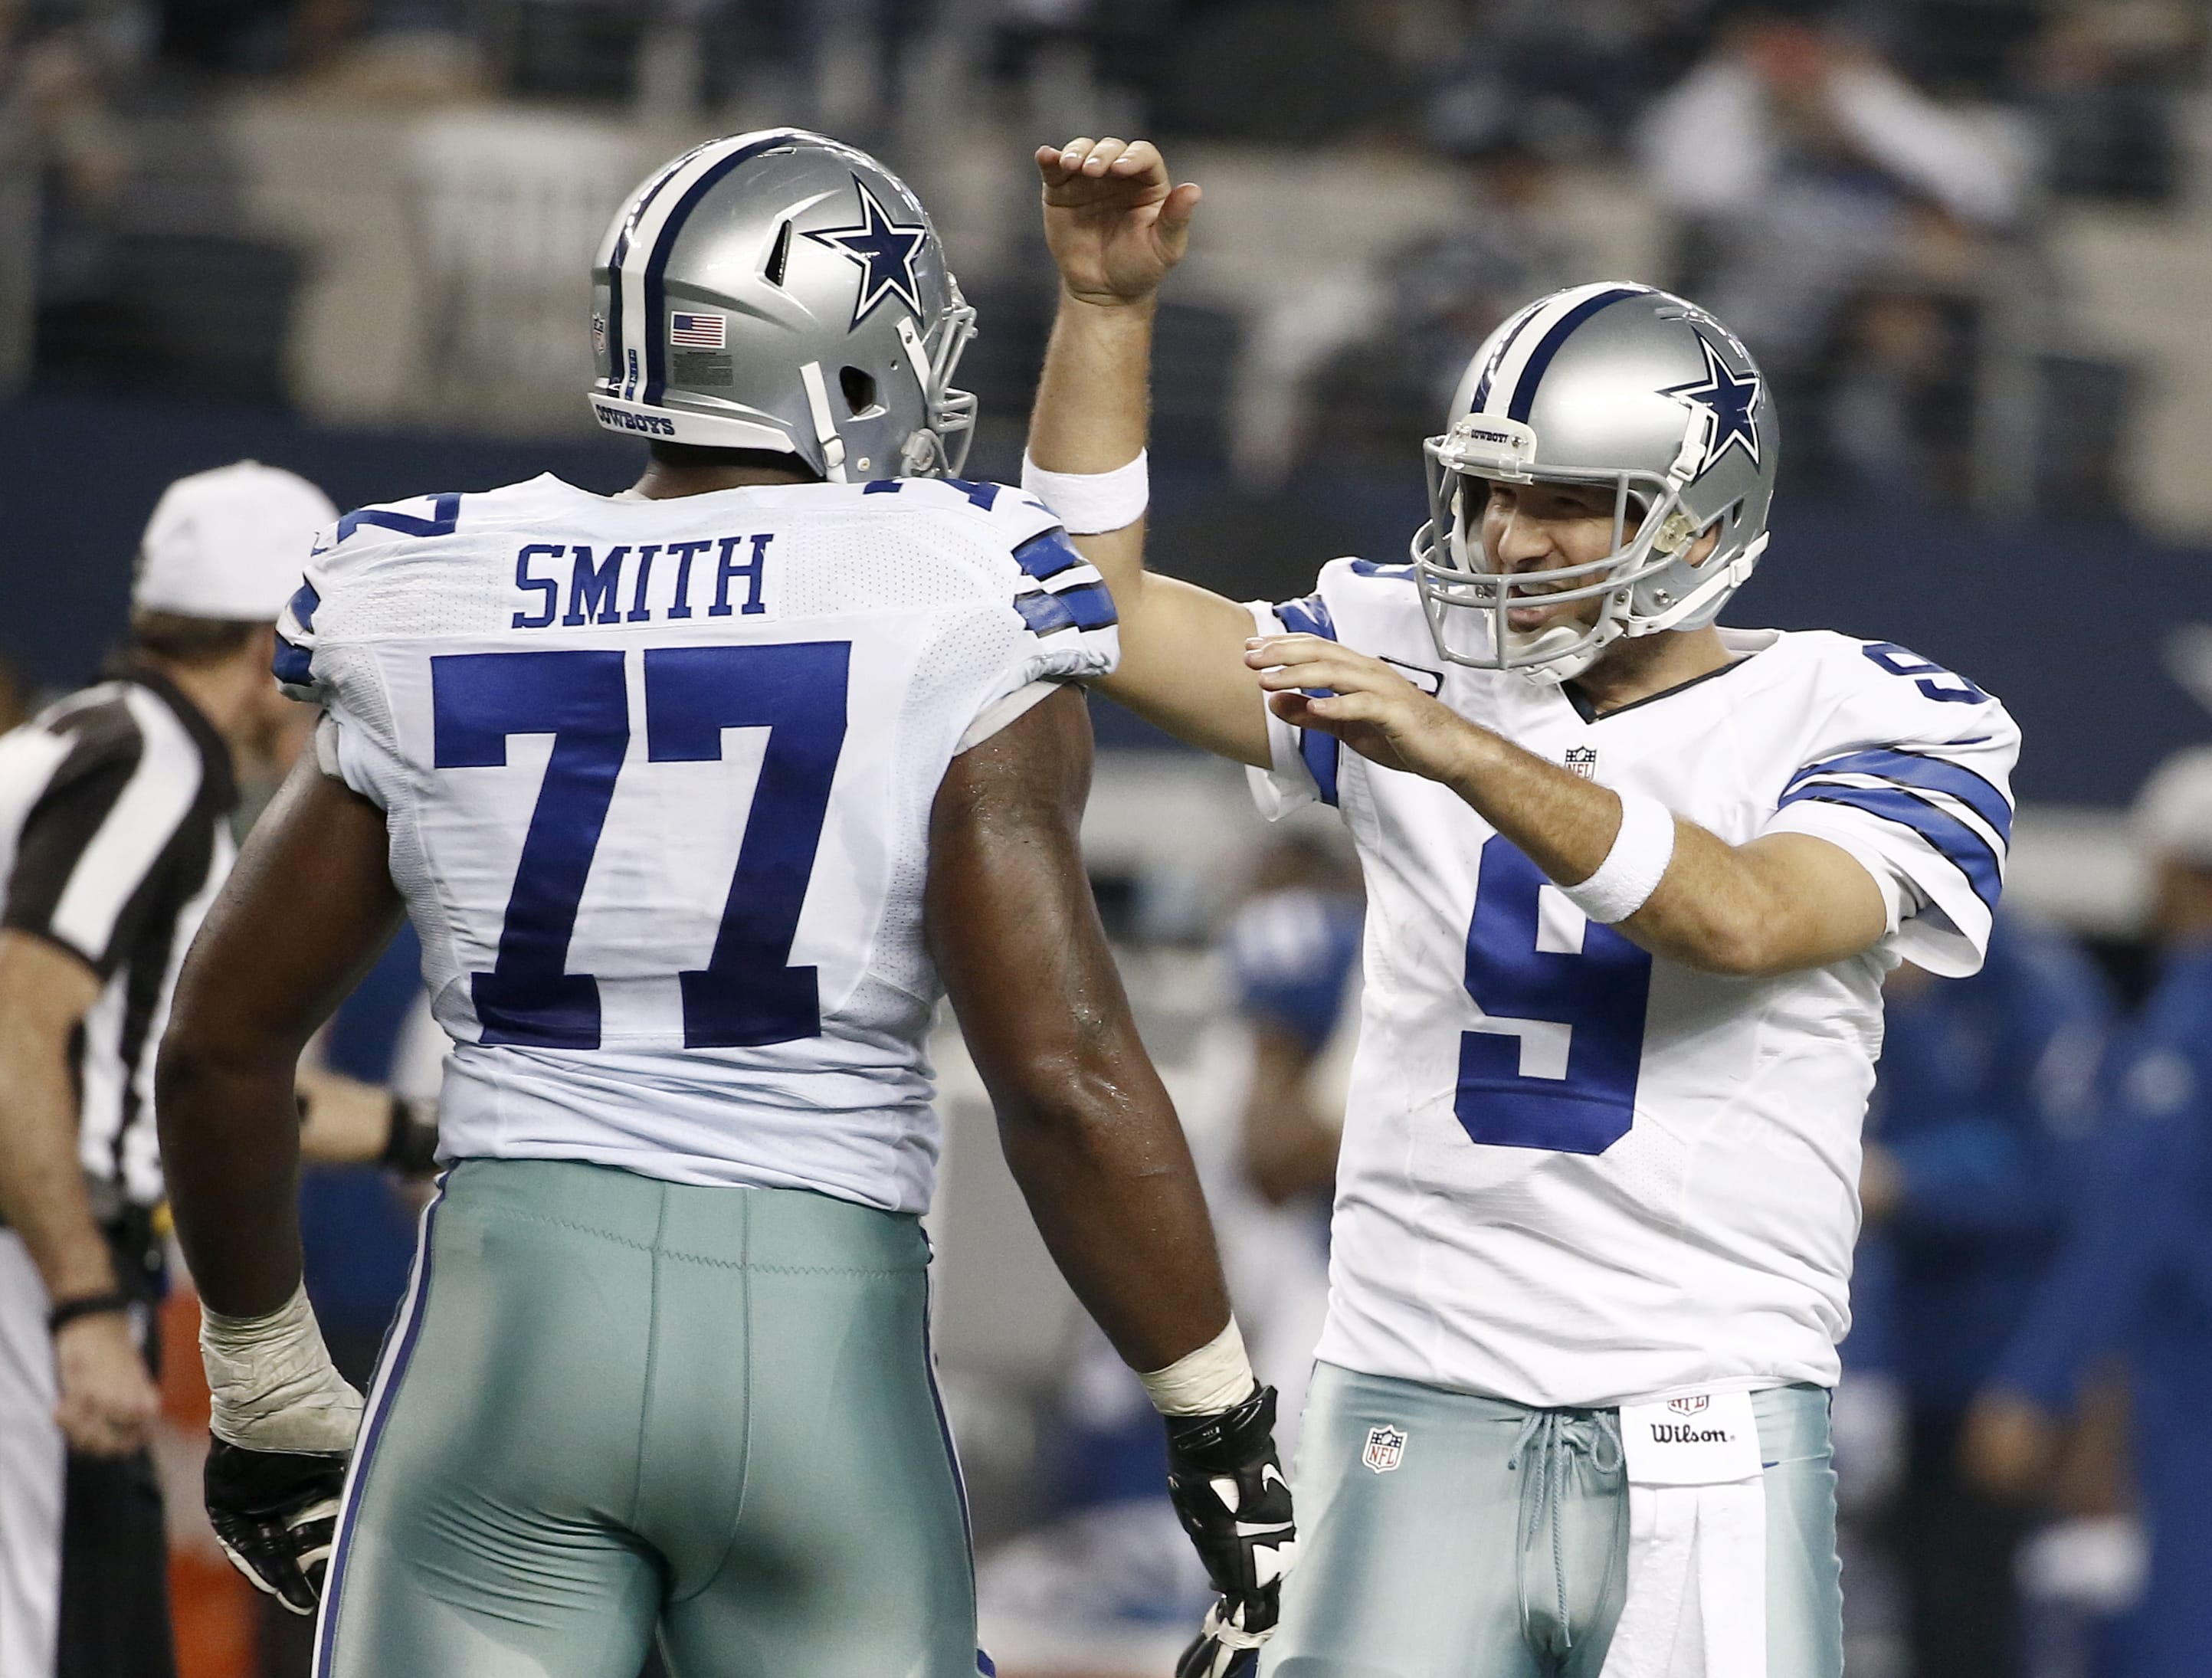 Dallas Cowboys quarterback Tony Romo (9) celebrates with Tyron Smith (77) after throwing a touchdown pass to Jason Witten during the second half against the Indianapolis Colts, Sunday, Dec. 21, 2014, in Arlington, Texas.